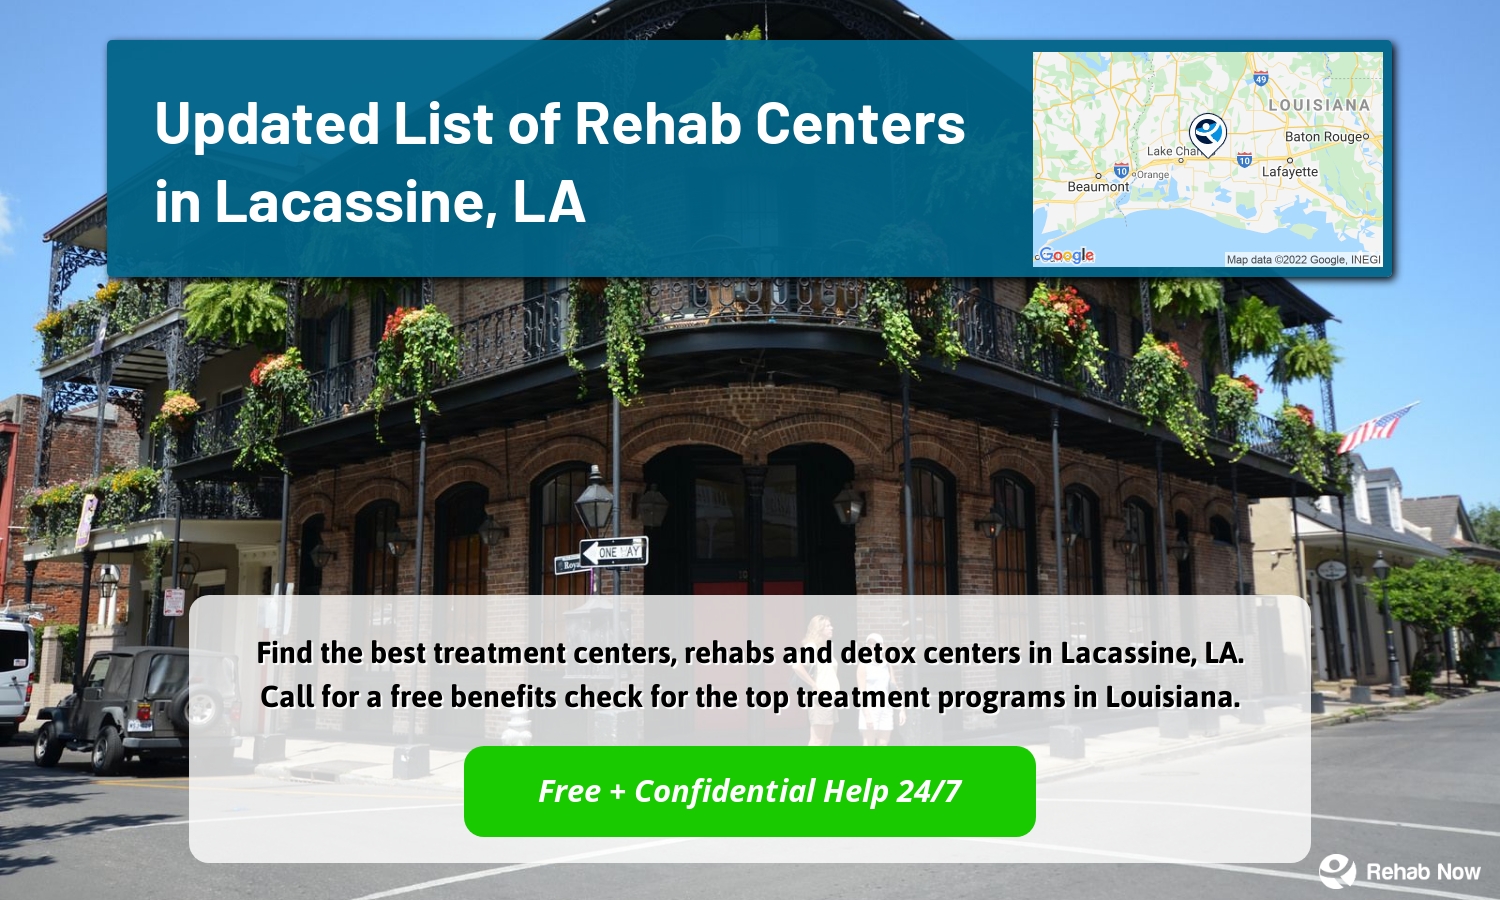 Find the best treatment centers, rehabs and detox centers in Lacassine, LA. Call for a free benefits check for the top treatment programs in Louisiana.